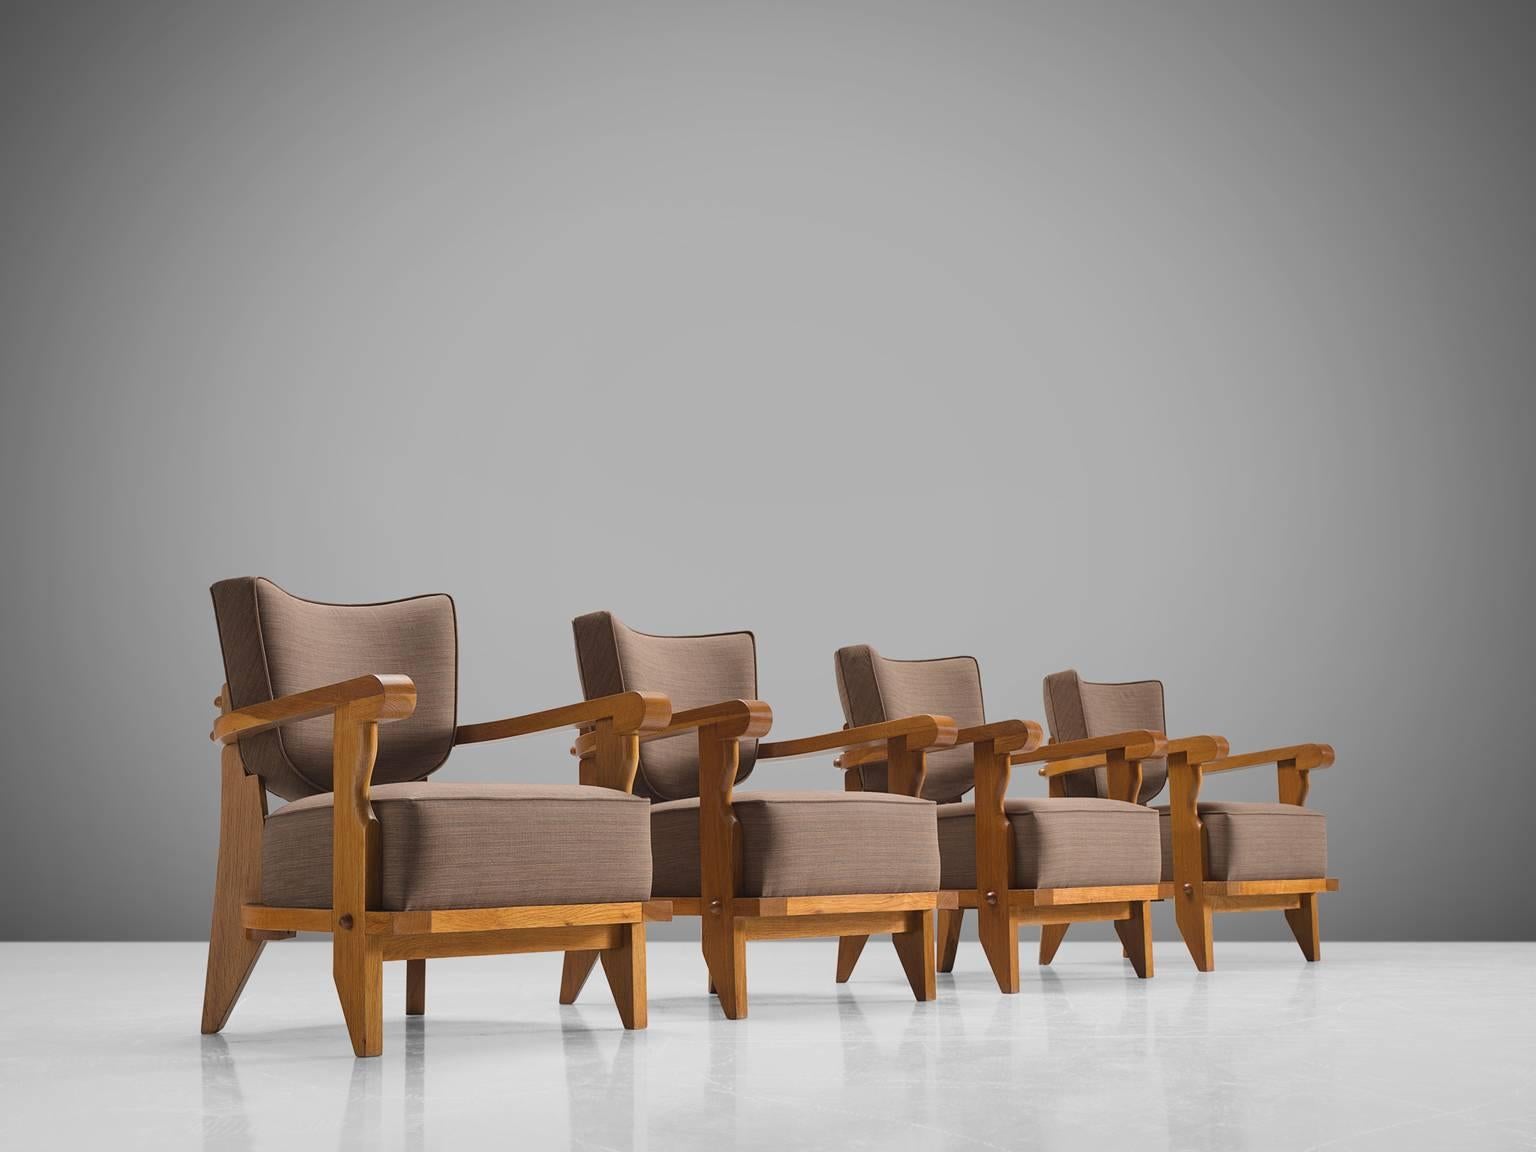 Jacques Chambron and Robert Guillerme, set of four easy chairs, grey fabric, oak, France, 1950s

This sculptural set of easy chairs by Guillerme and Chambron is very well executed and made out of solid, carved blond oak. This set of comfortable